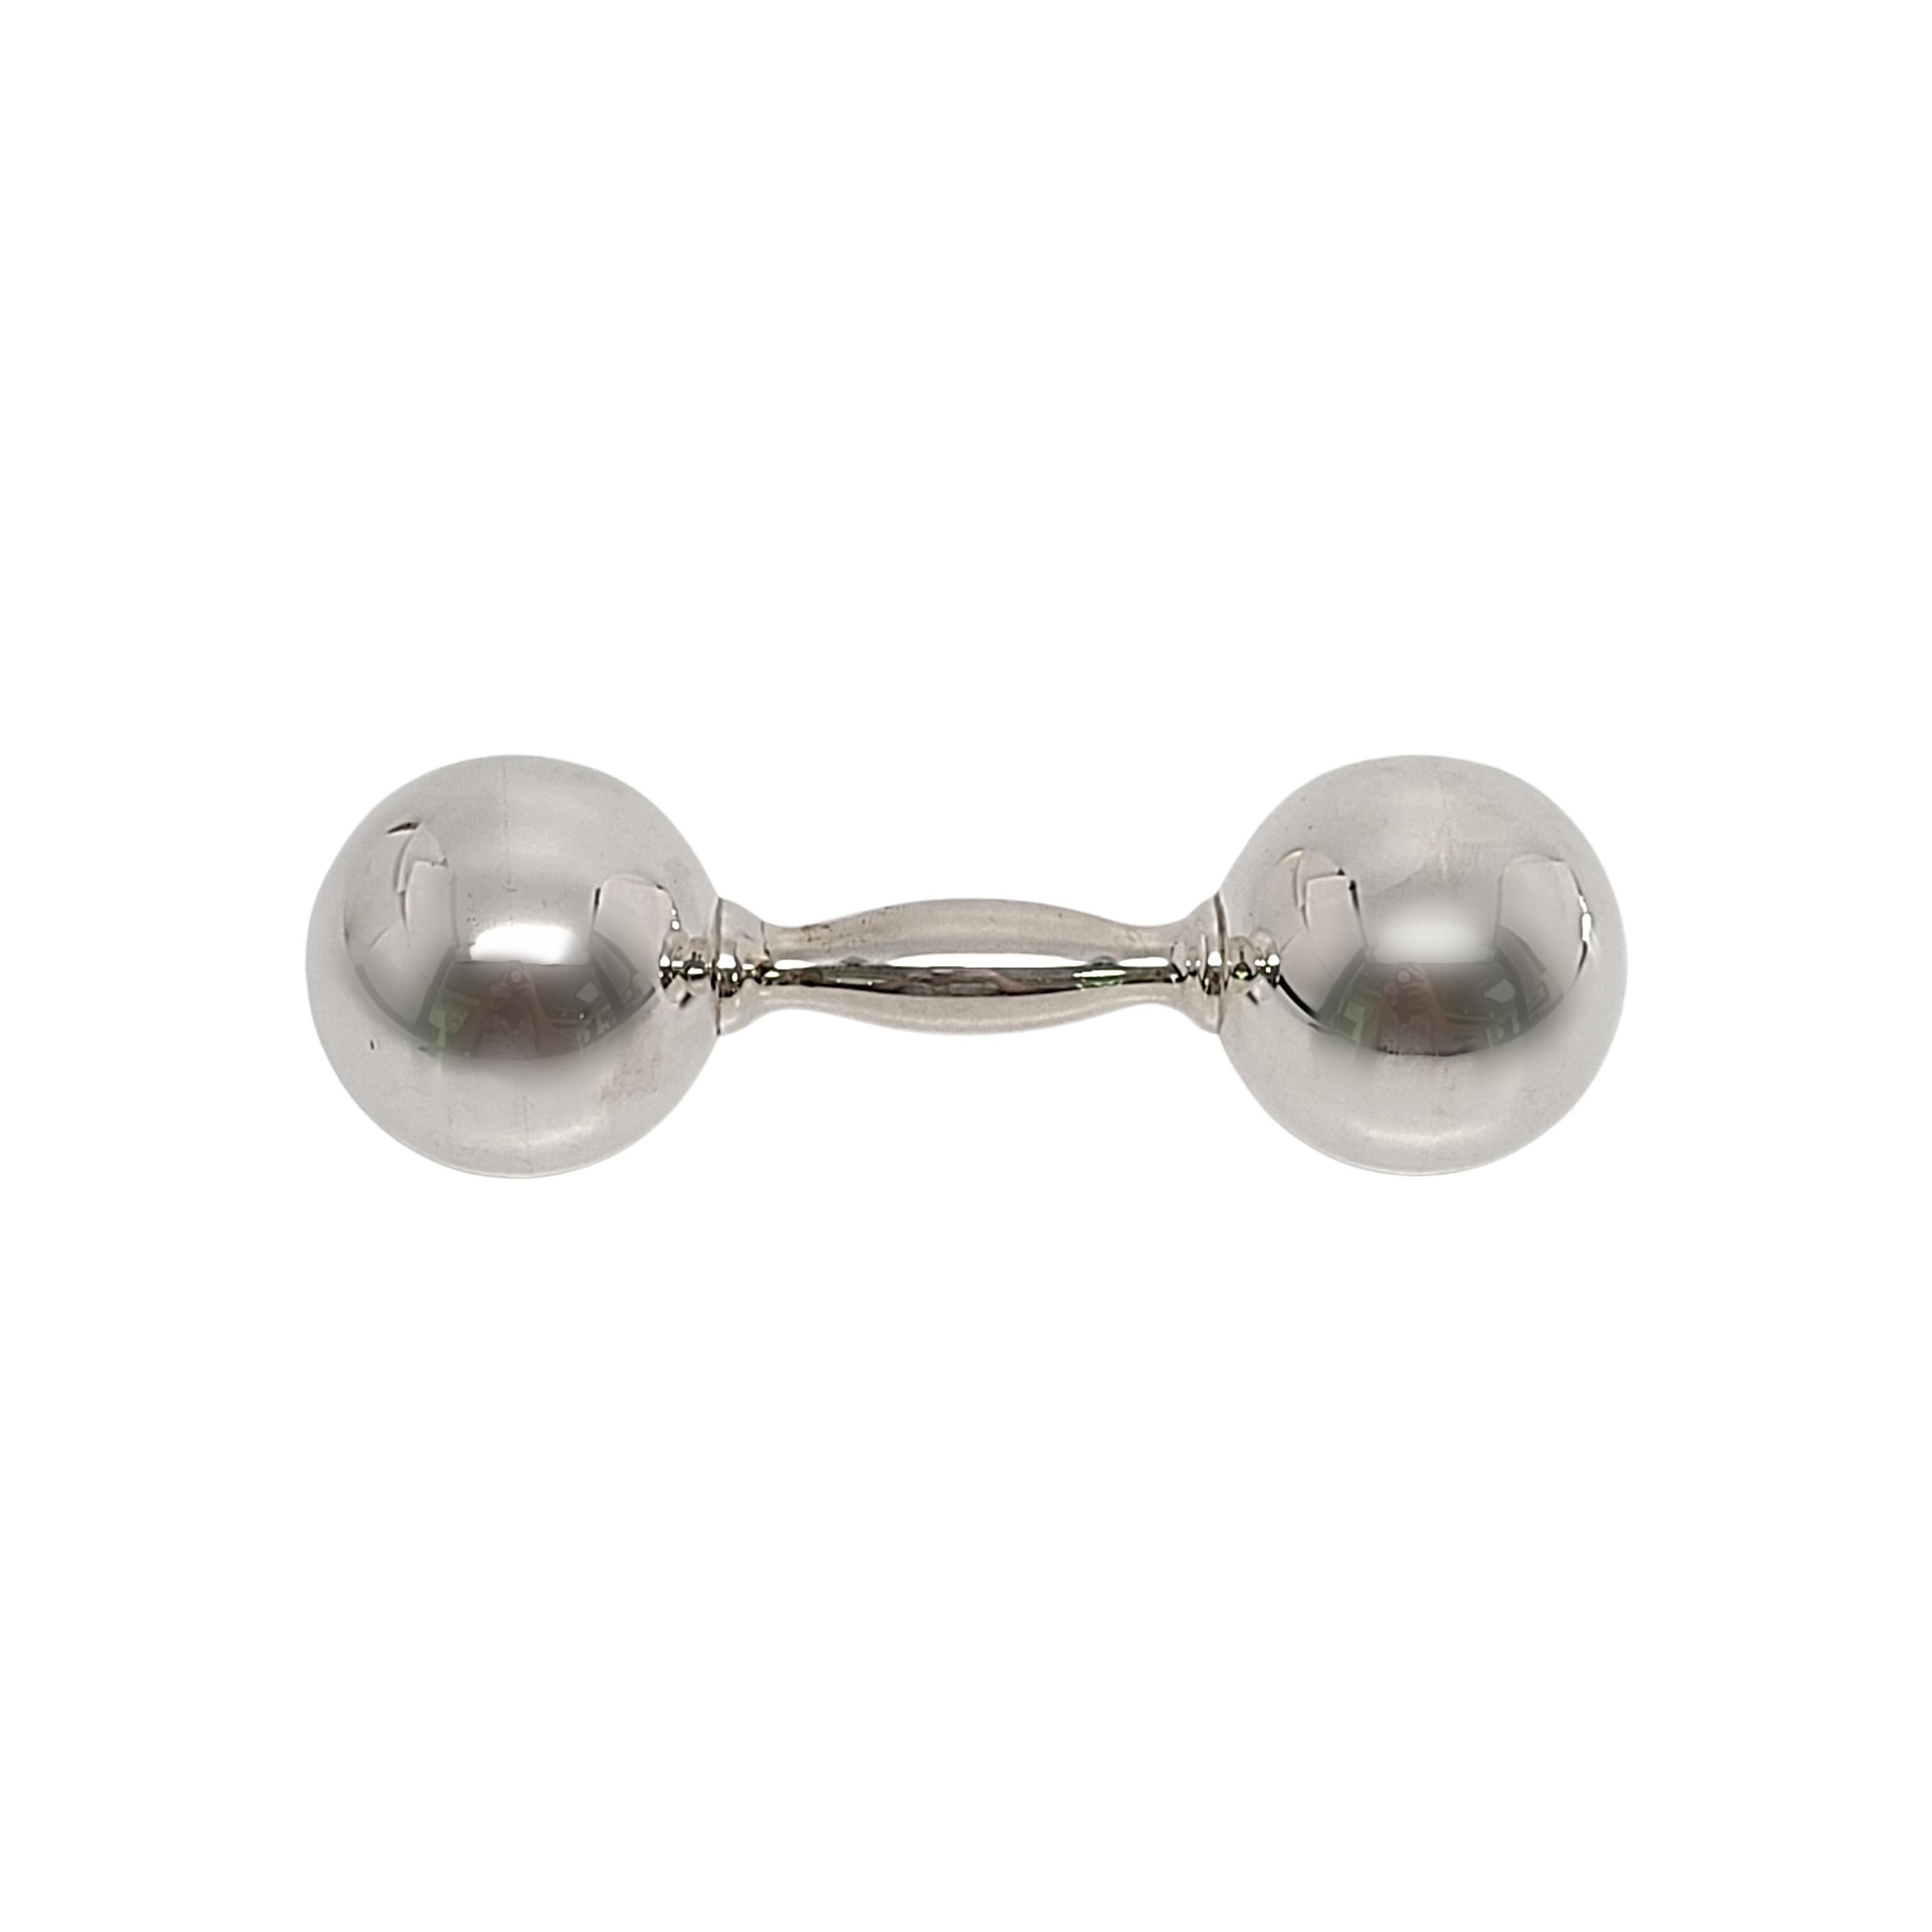 Tiffany & Co sterling silver barbell rattle.

This is a beautiful and charming sterling silver dumbbell baby rattle, a classic design by Tiffany & Co. It has a soft sweet jingle when you shake it. Does not include Tiffany & Co box or